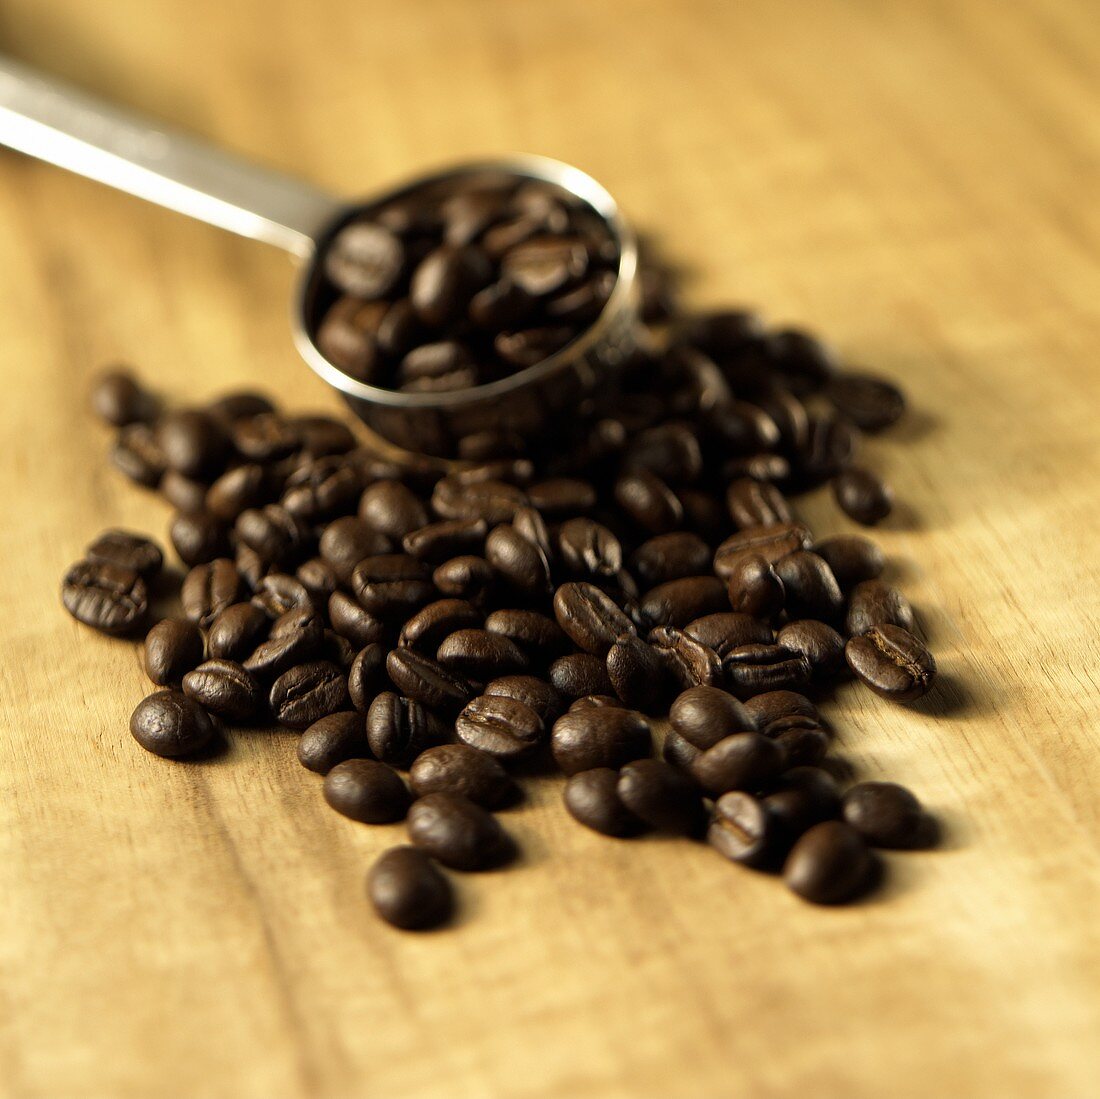 Roasted coffee beans on wooden background, coffee measure